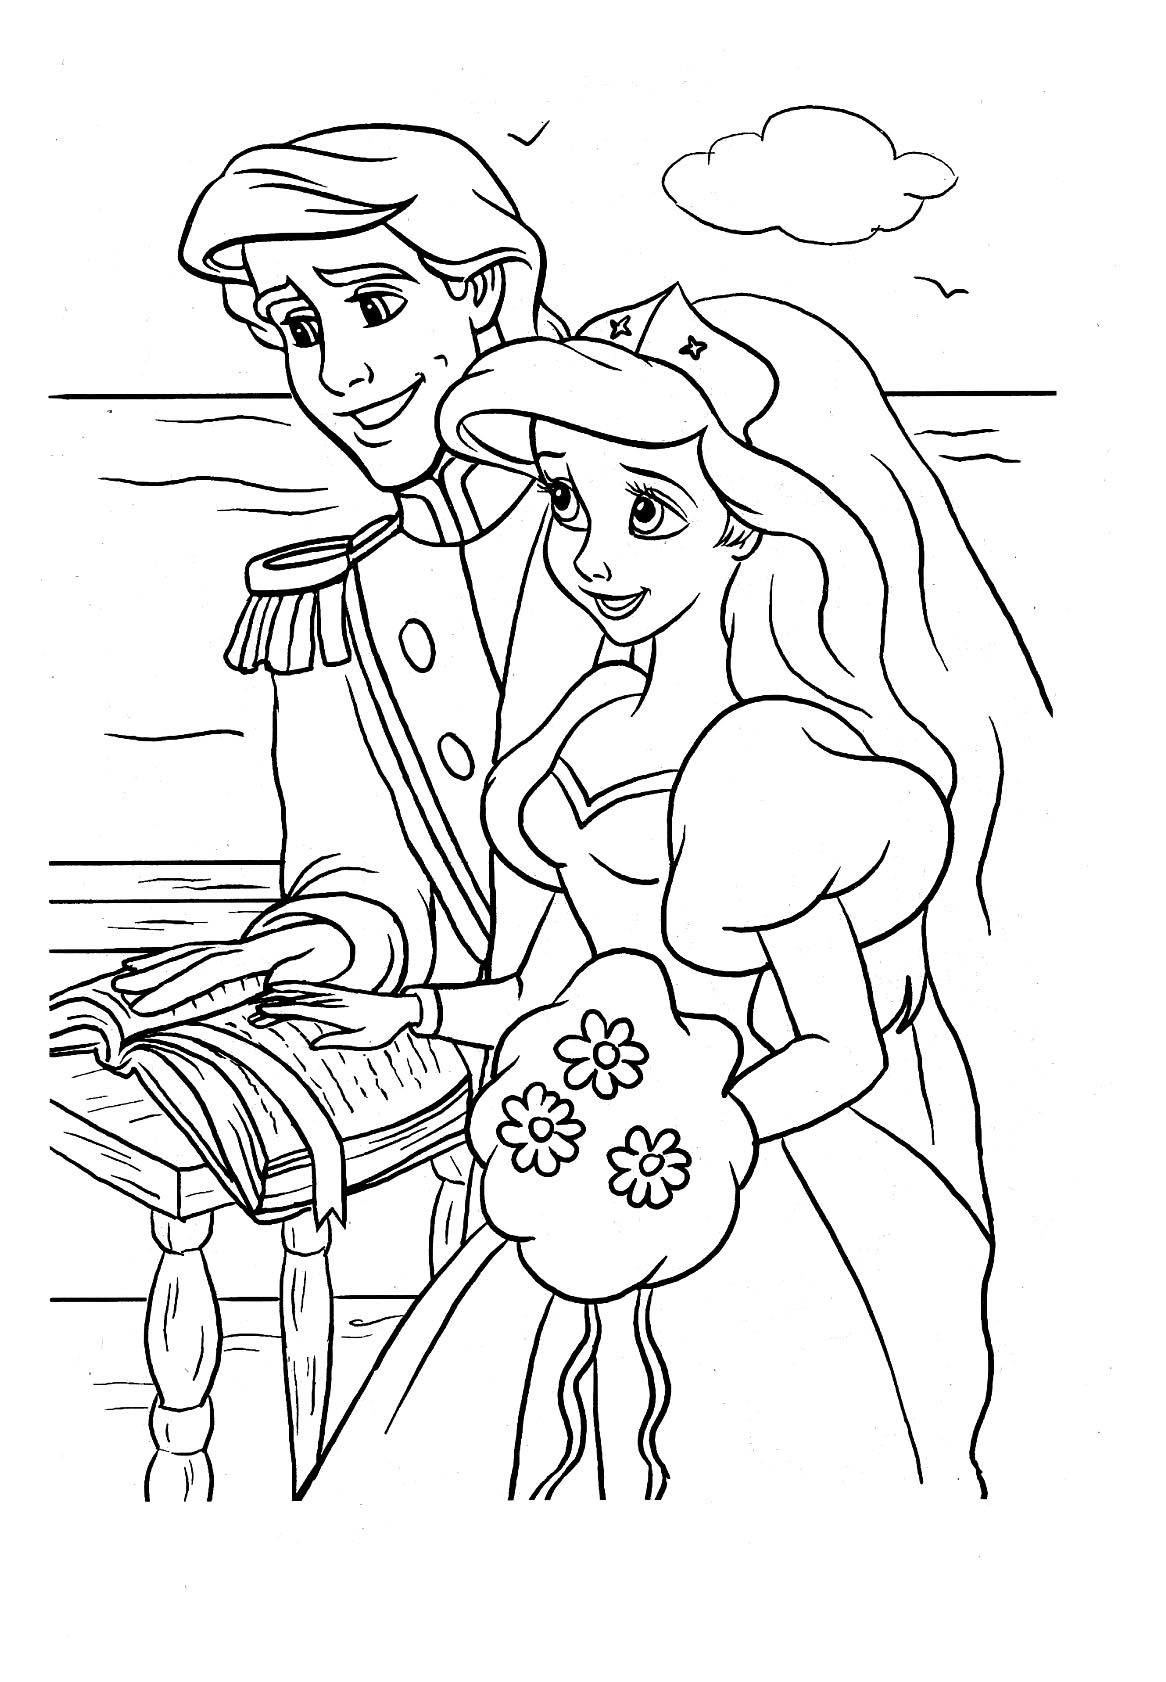 Coloring page The Little Mermaid #127280 (Animation Movies) – Printable